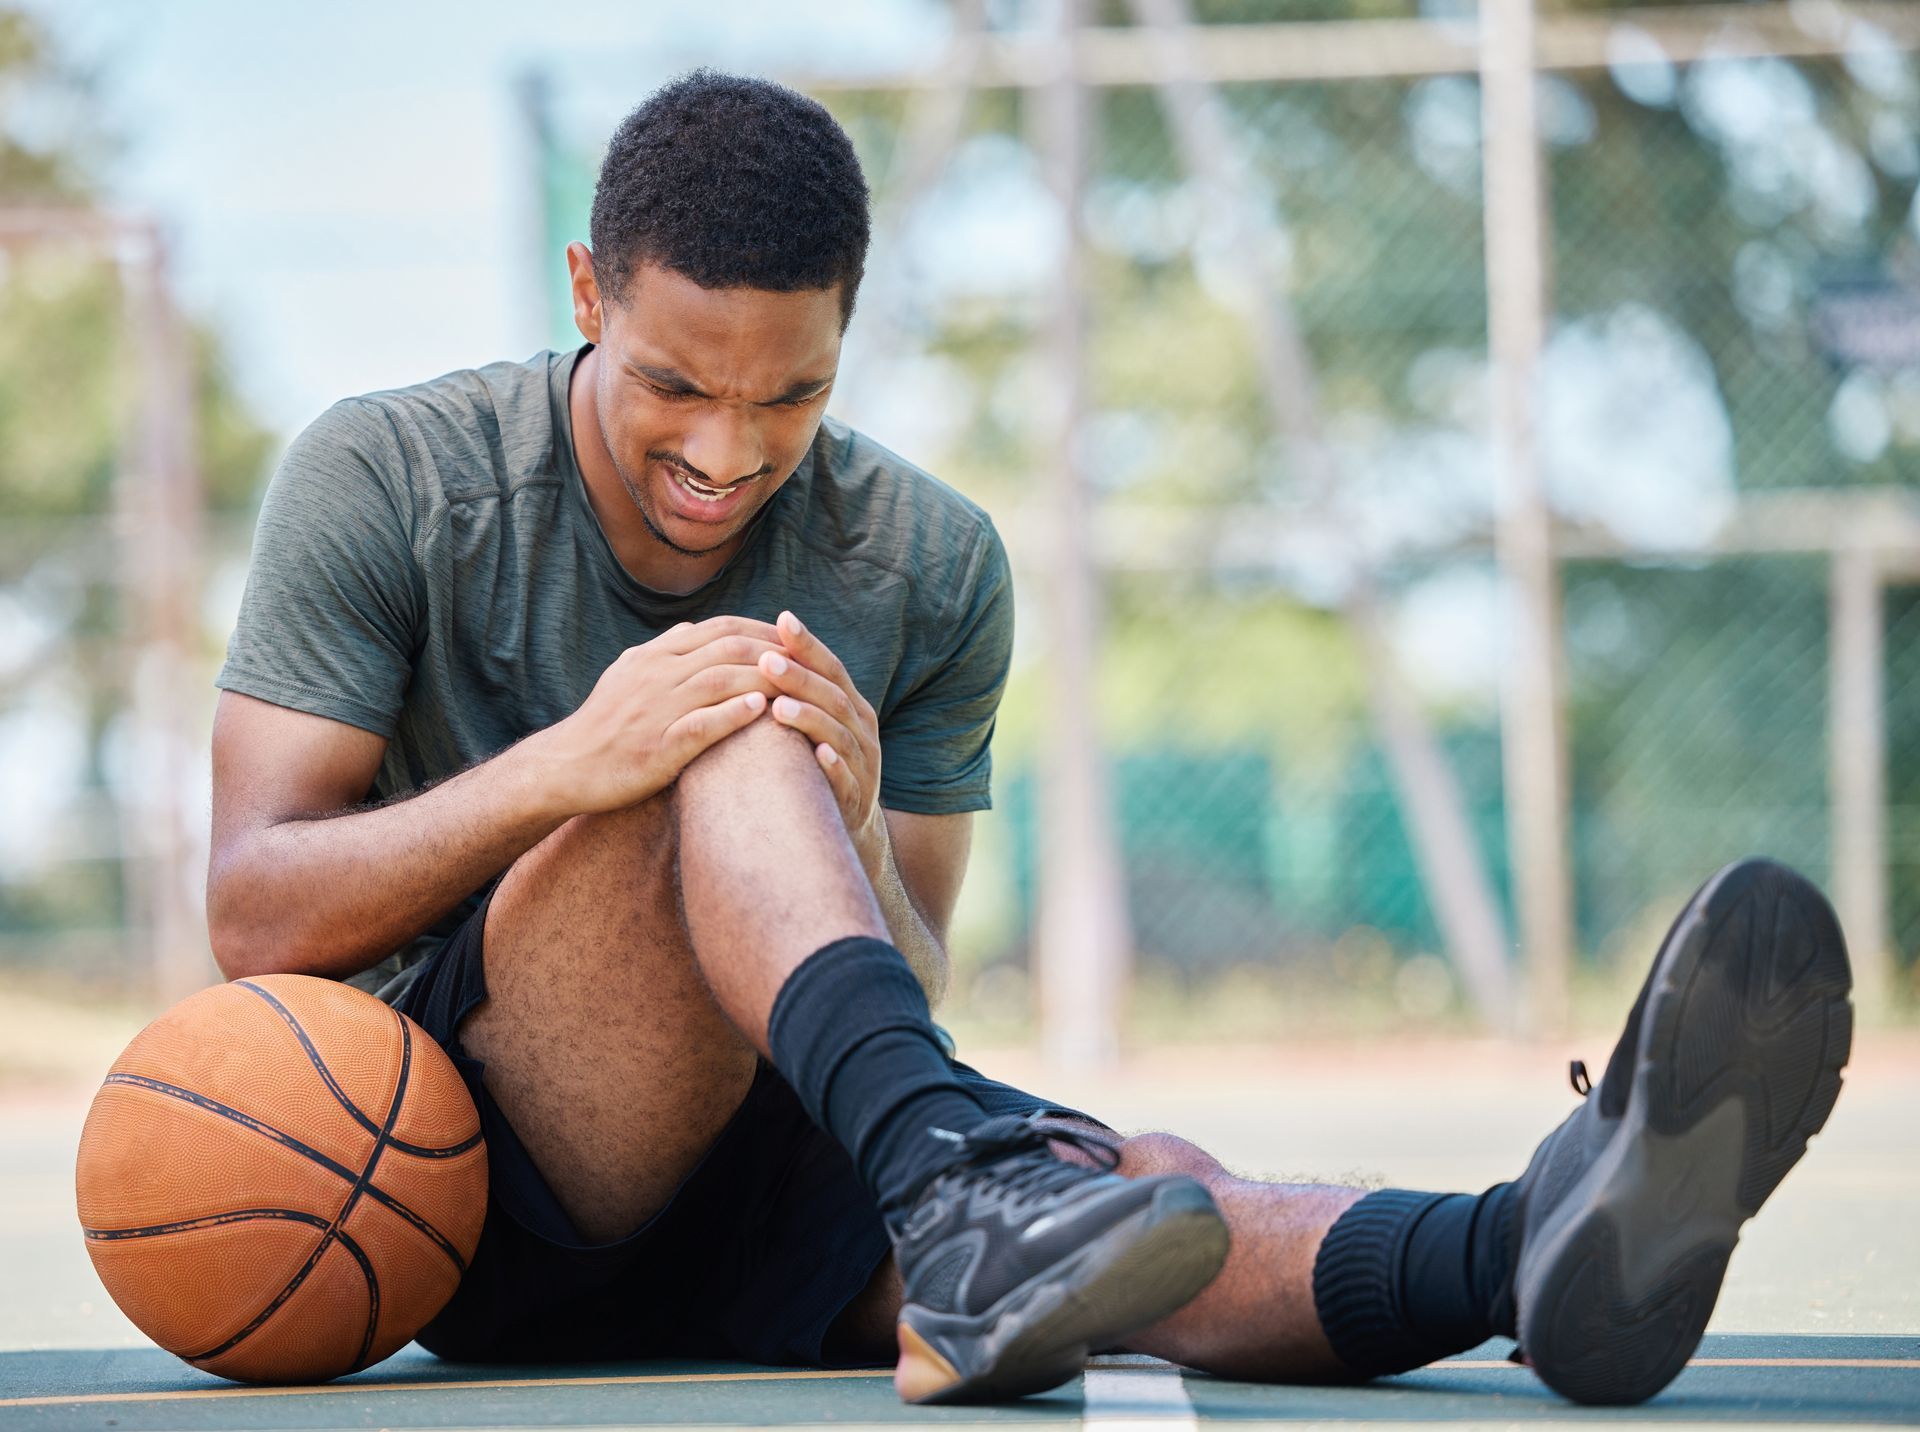 a man is sitting on the ground with a basketball and holding his knee after an ACL injury